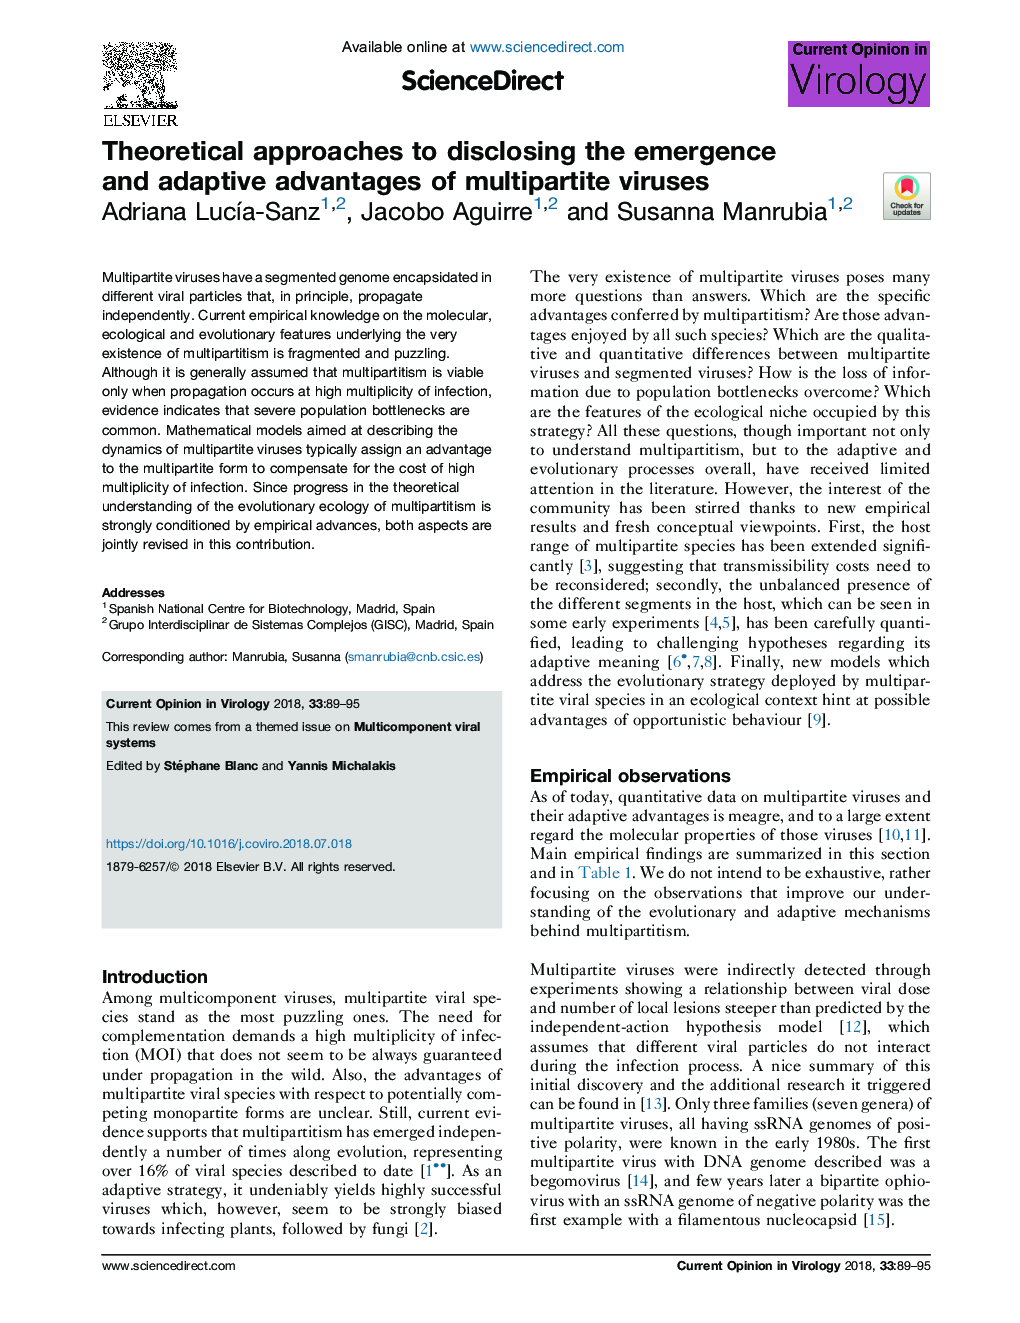 Theoretical approaches to disclosing the emergence and adaptive advantages of multipartite viruses